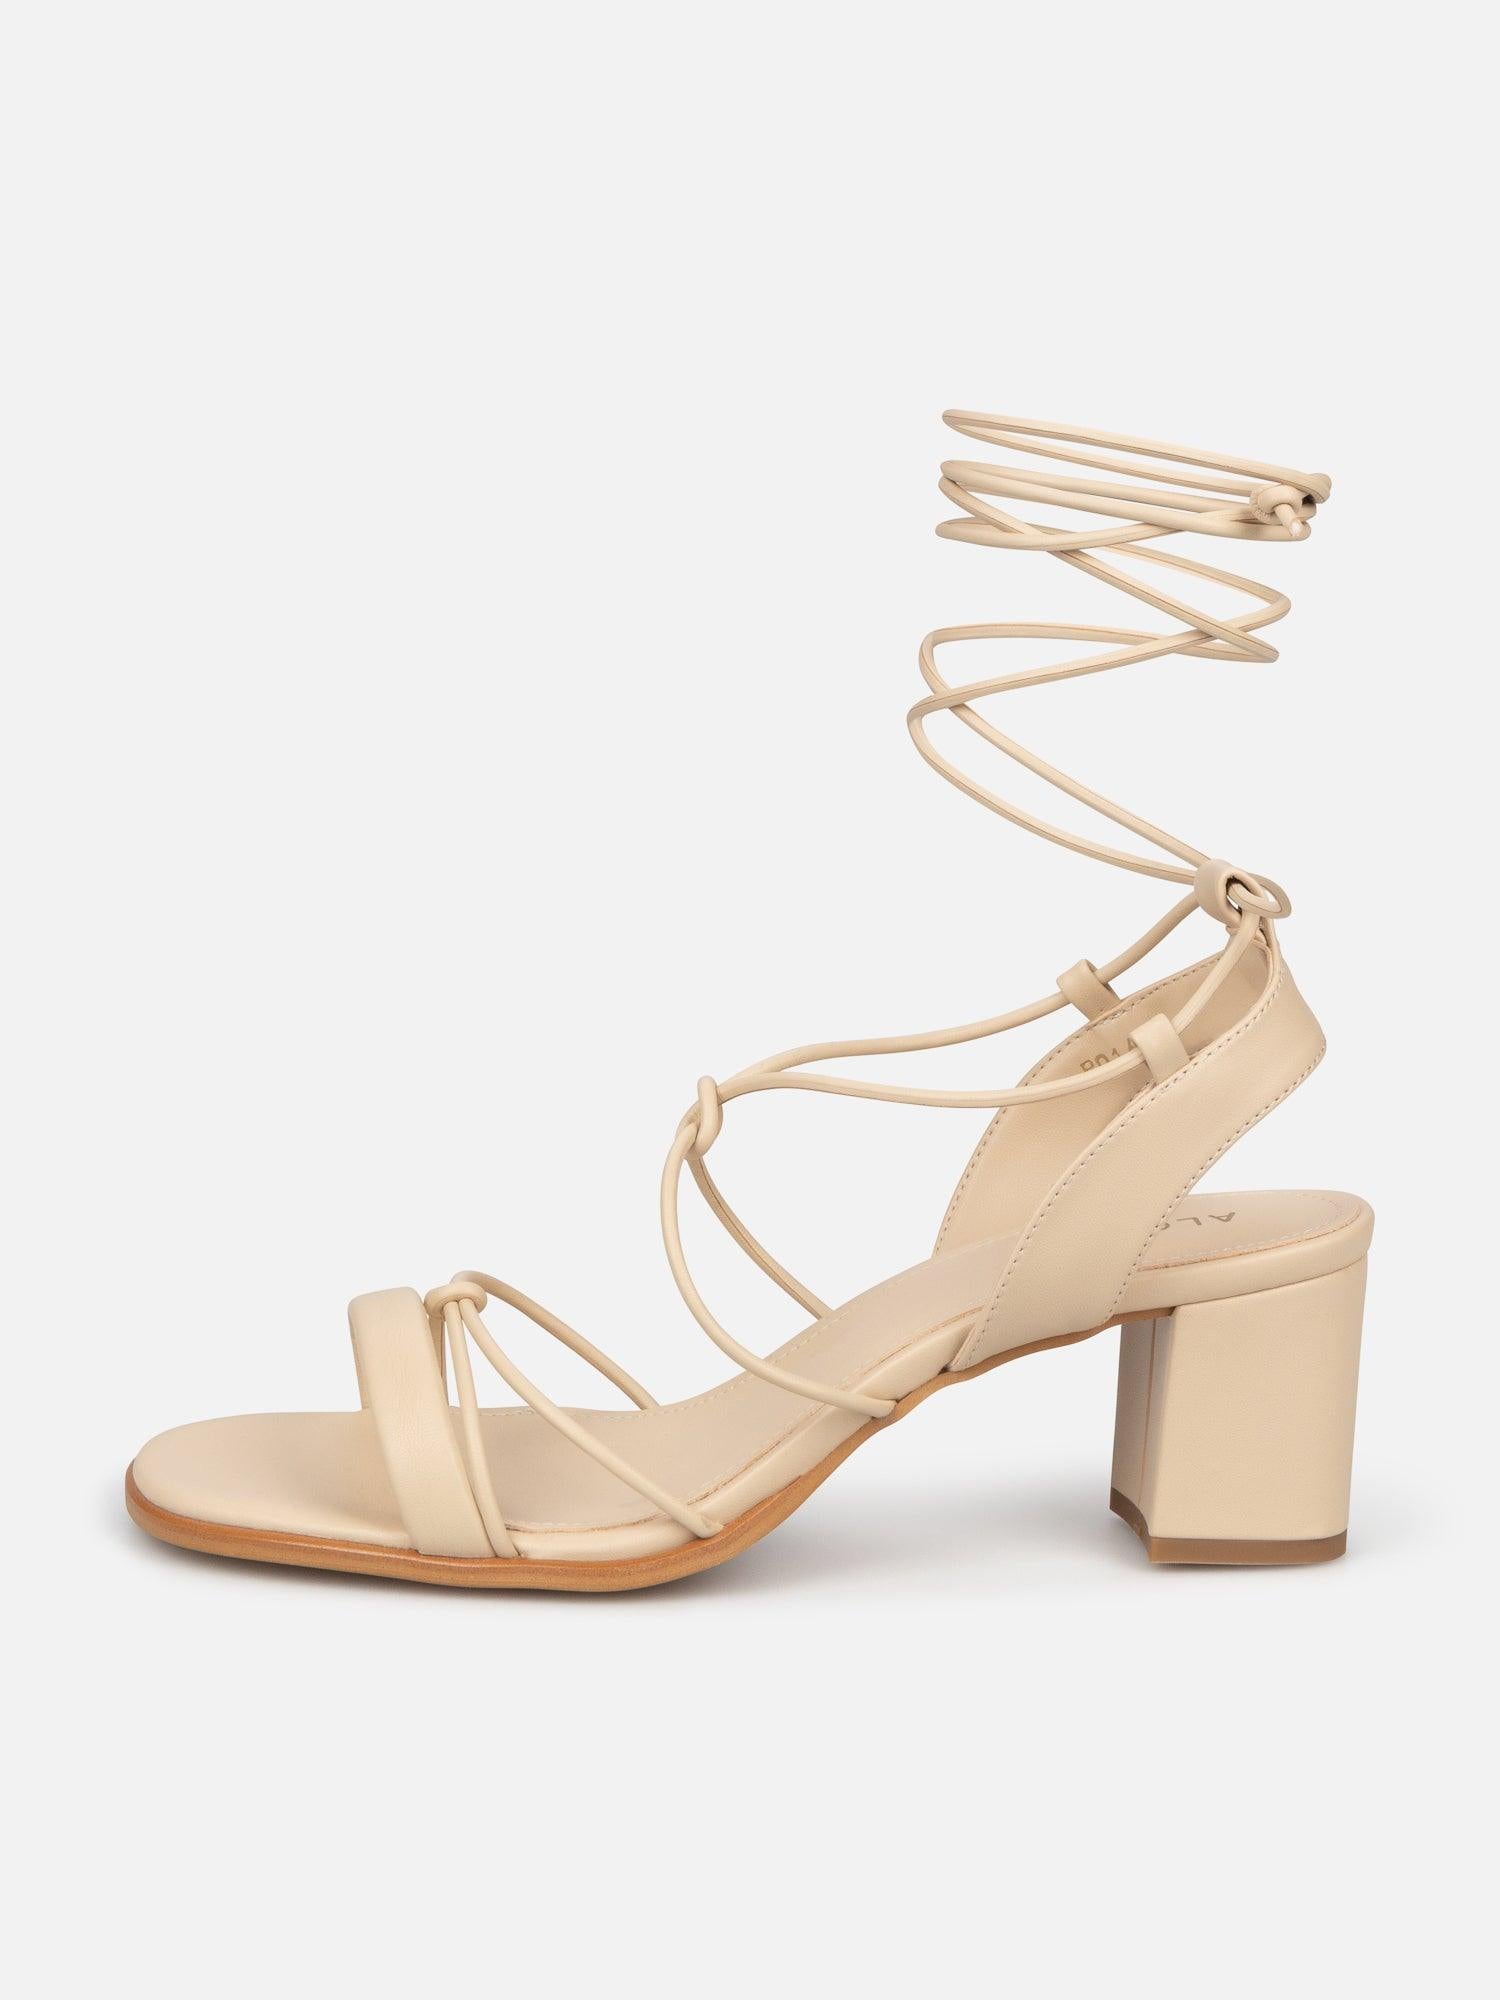 Alohas Sophie Corn Vegan Sand Strappy Sandals - Corn - Thought Clothing UK